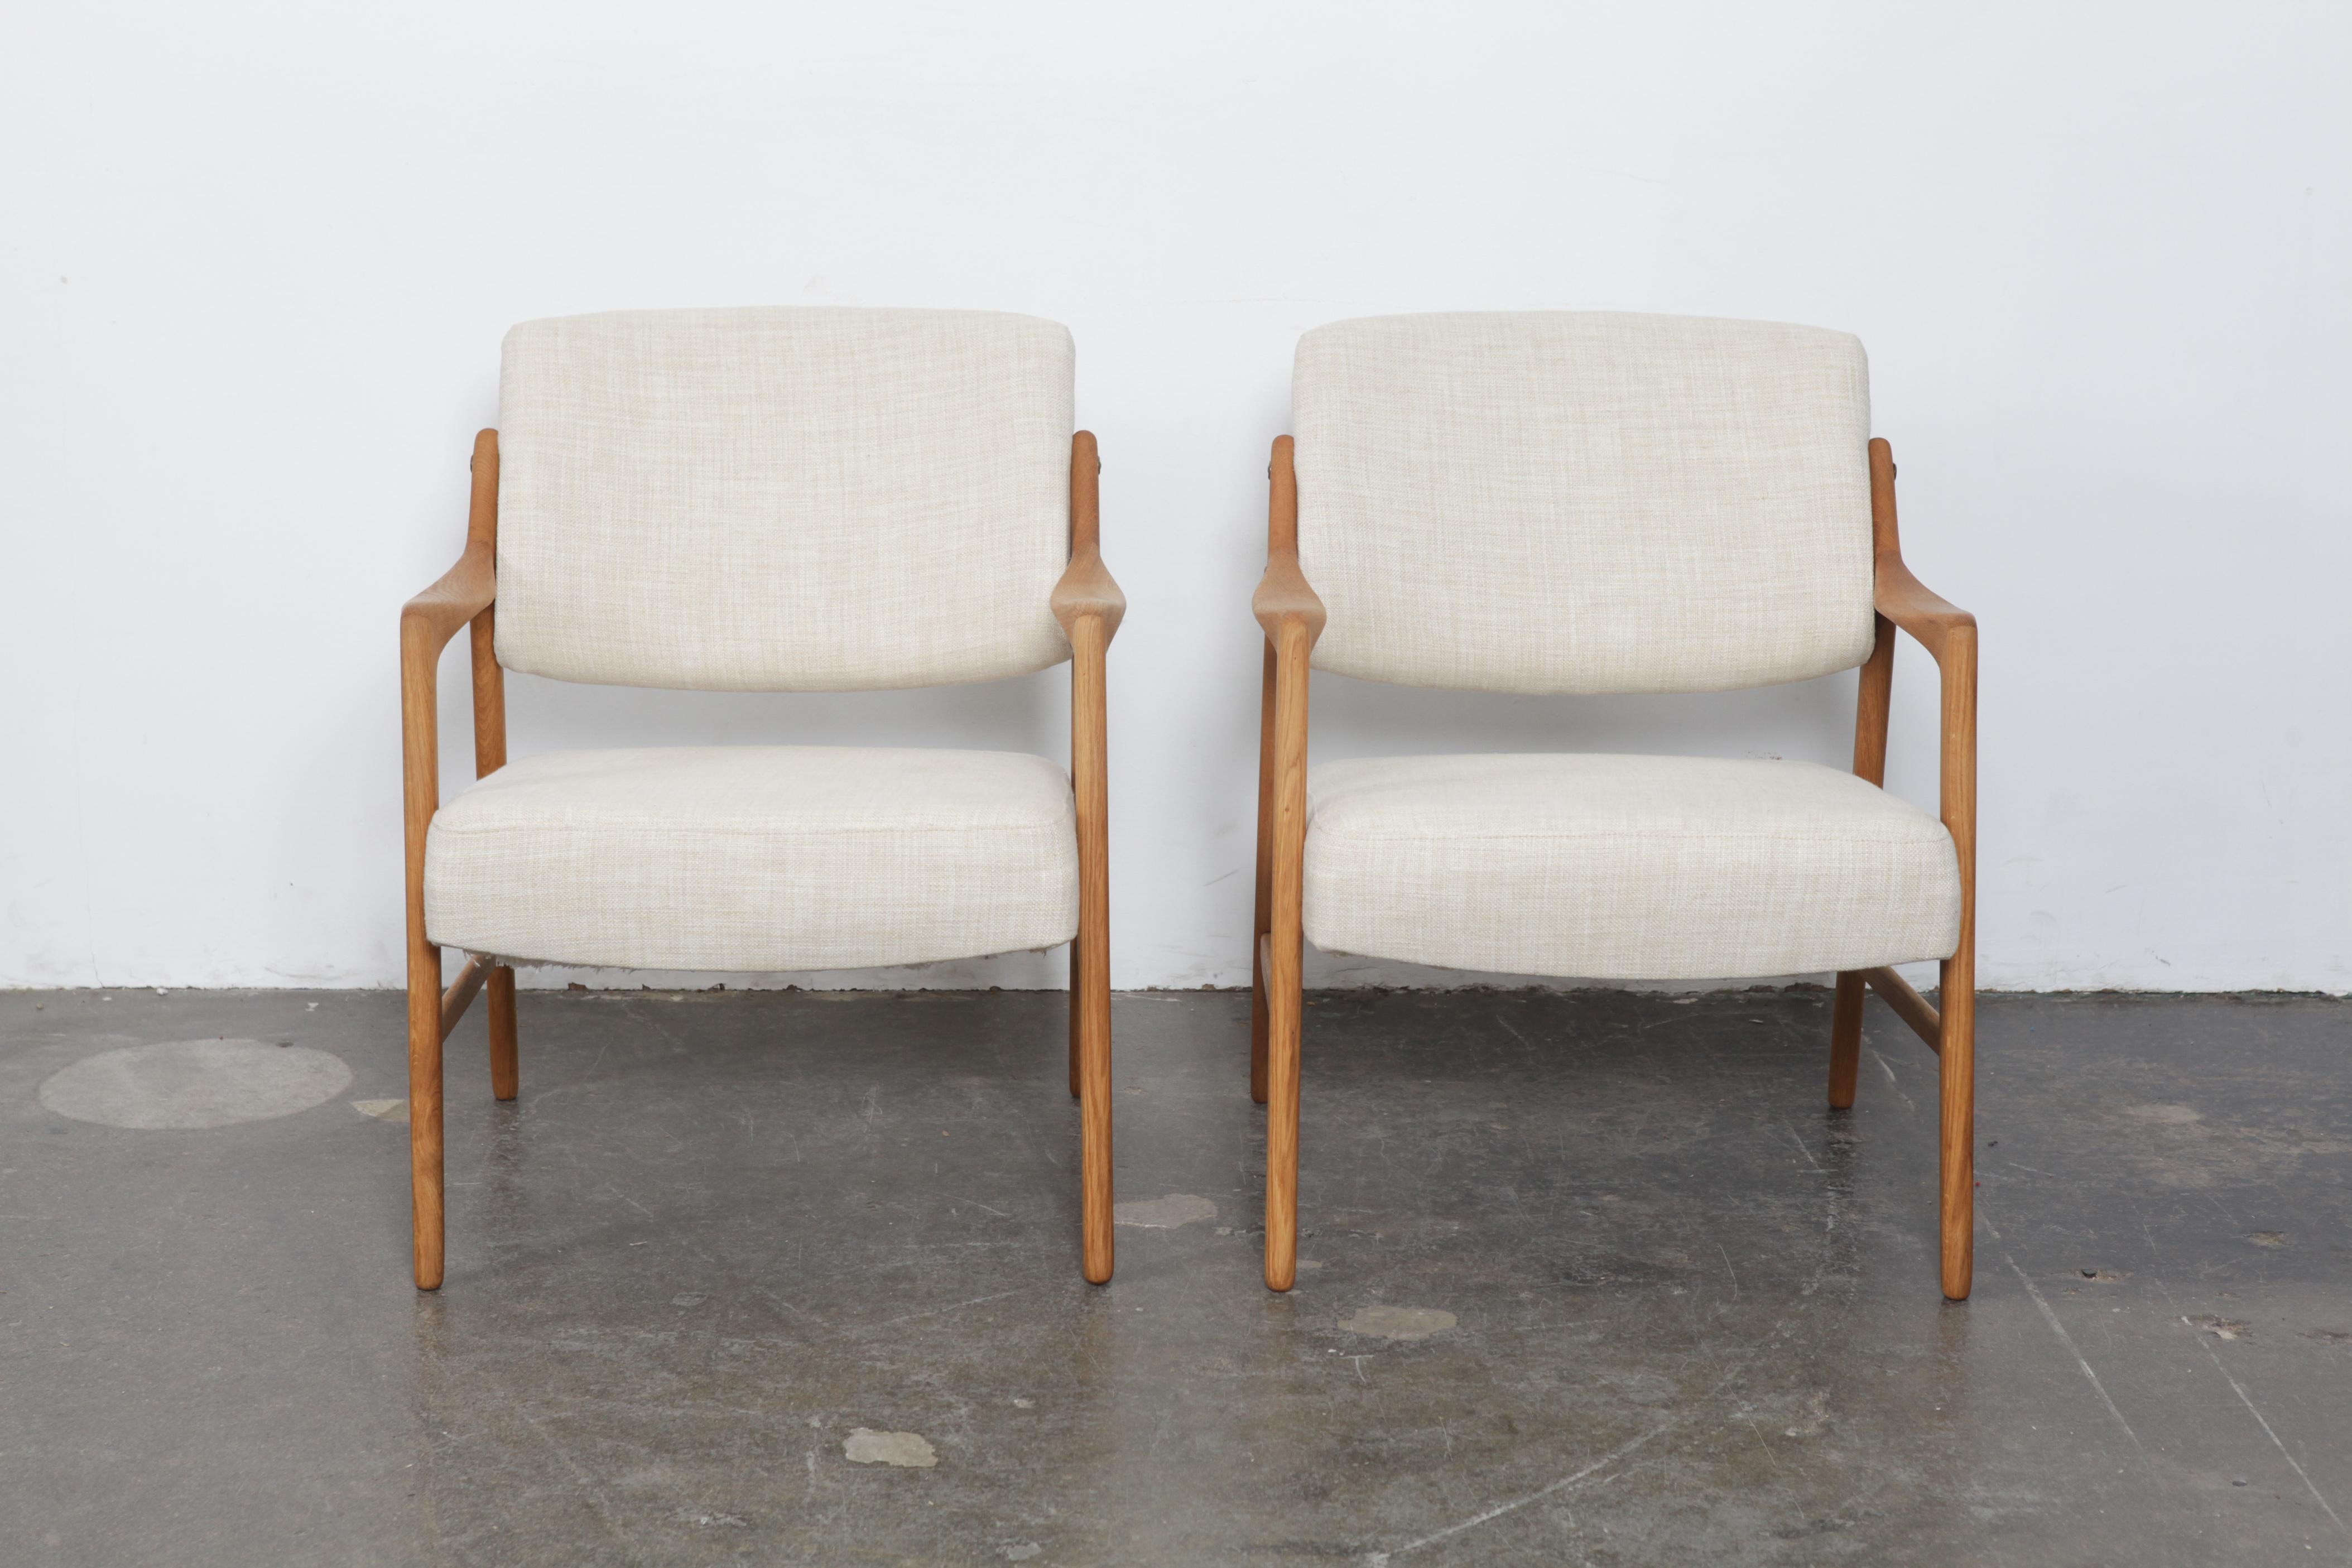 Pair of oak framed chairs, Swedish, designed by Inge Andersson for Bröderna Andersson, circa 1957, model 